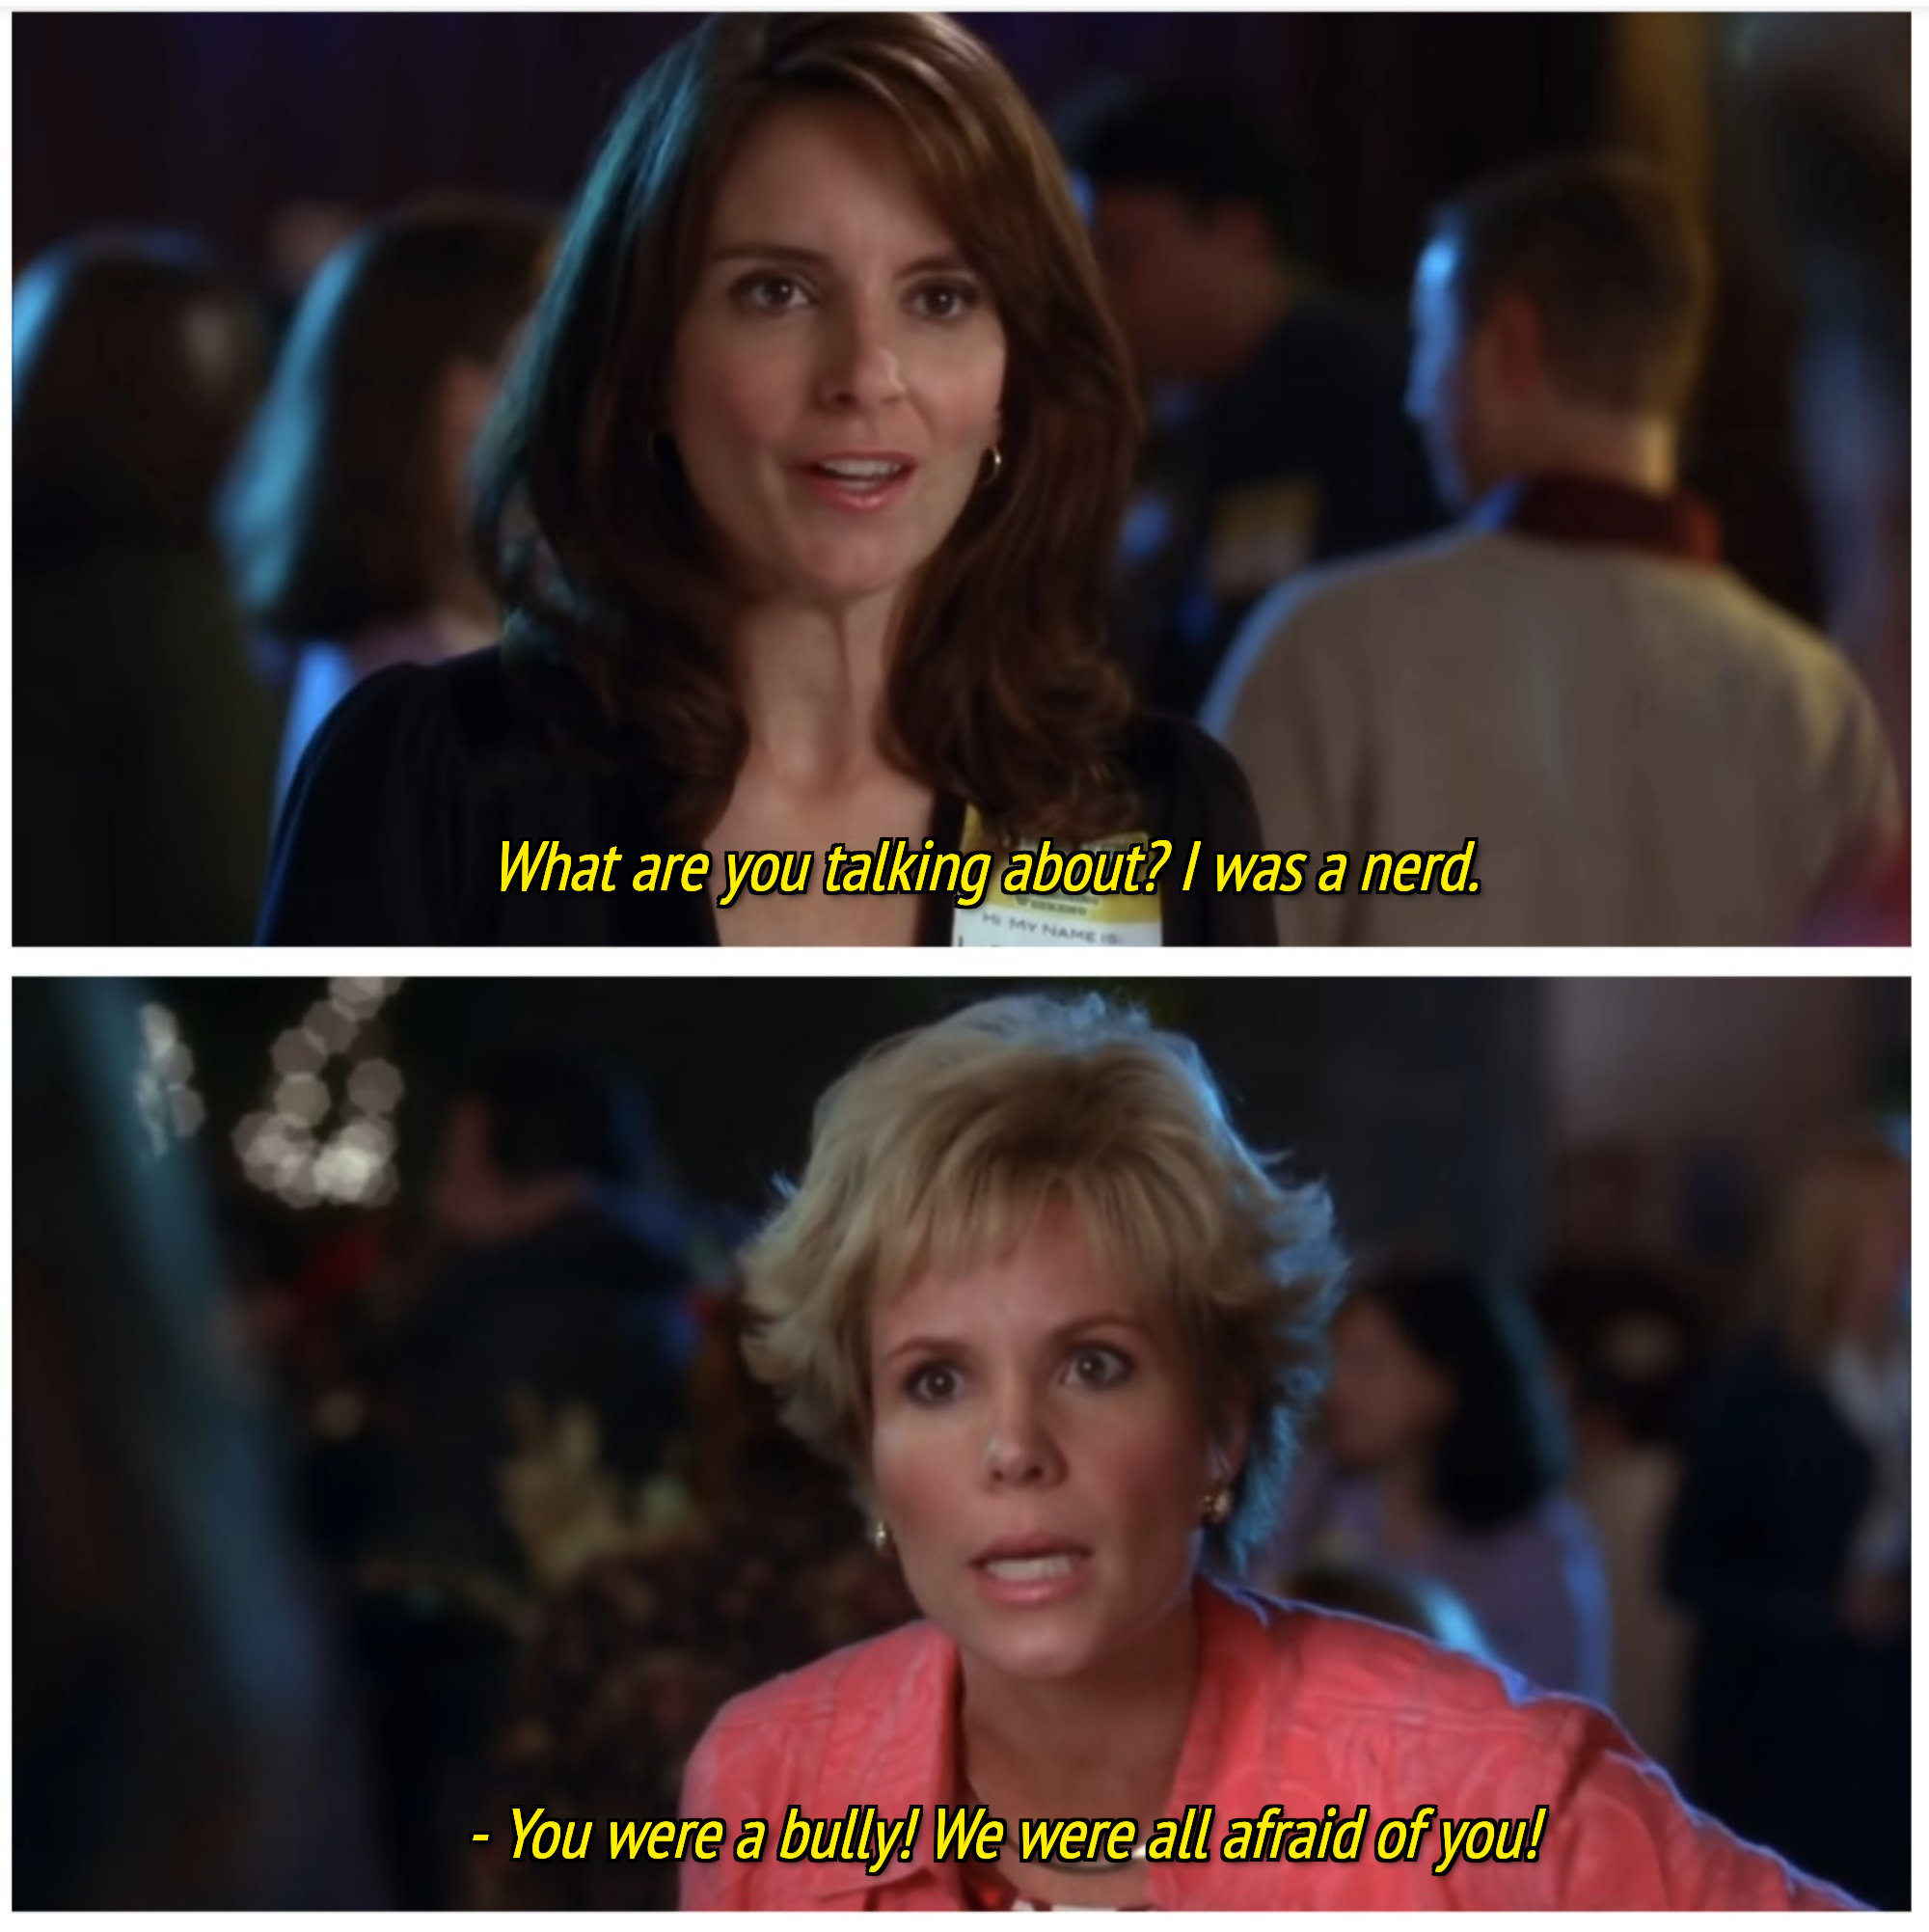 tina fey as liz lemon confronts one of her victims at a class reunion in &quot;30 rock&quot;